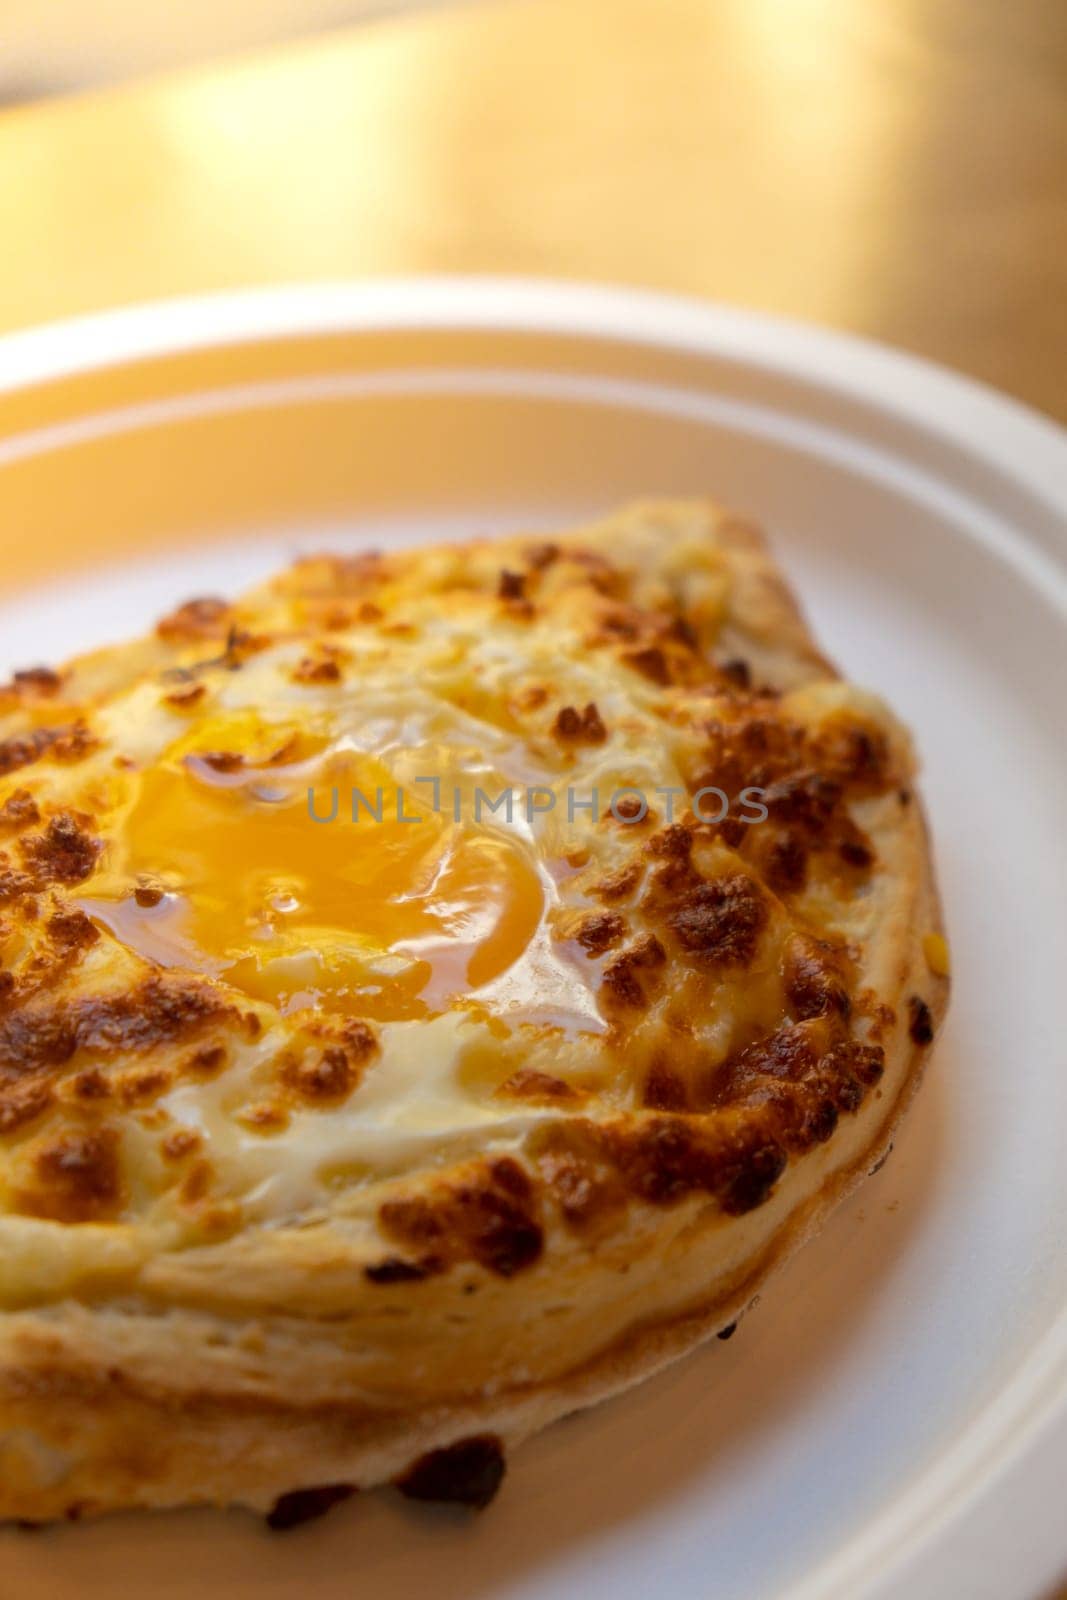 Traditional Georgian cuisine. Ajara khachapuri on paper plate. Filled with cheese and topped with raw egg and butter, cheese-filled bread. Delicious food